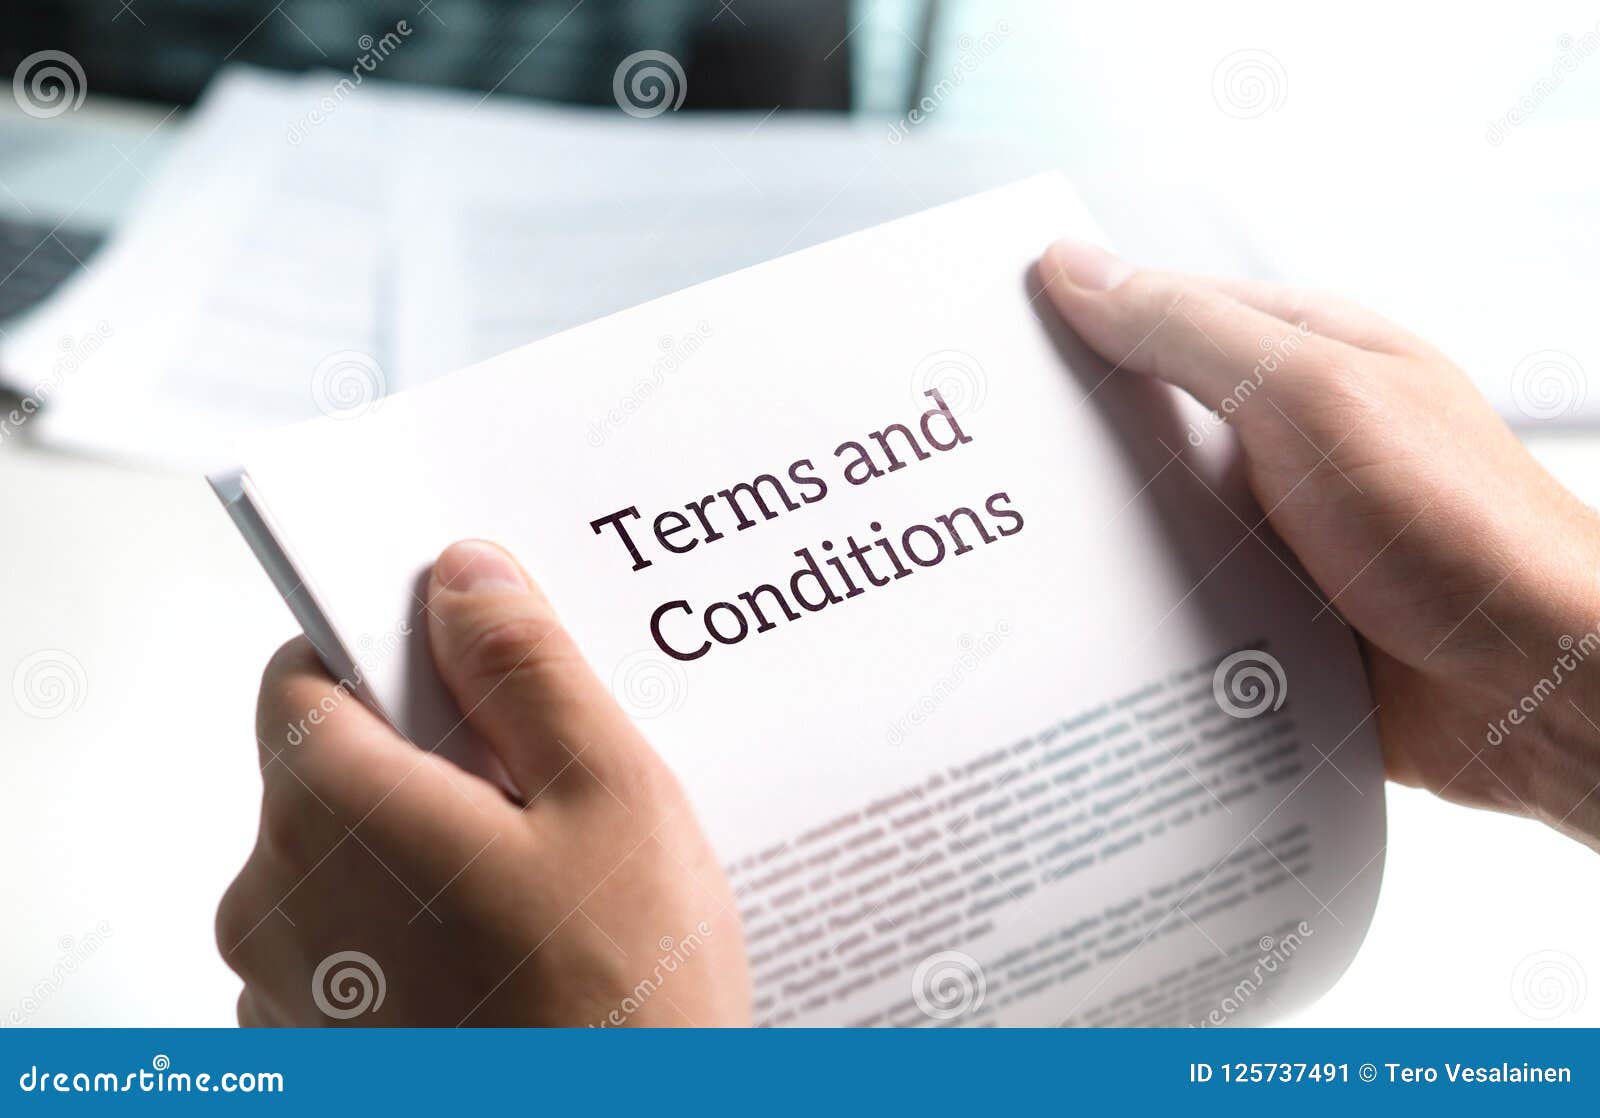 Terms And Conditions Text In Legal Agreement Or Document Stock Image Image Of Customer Holding 125737491